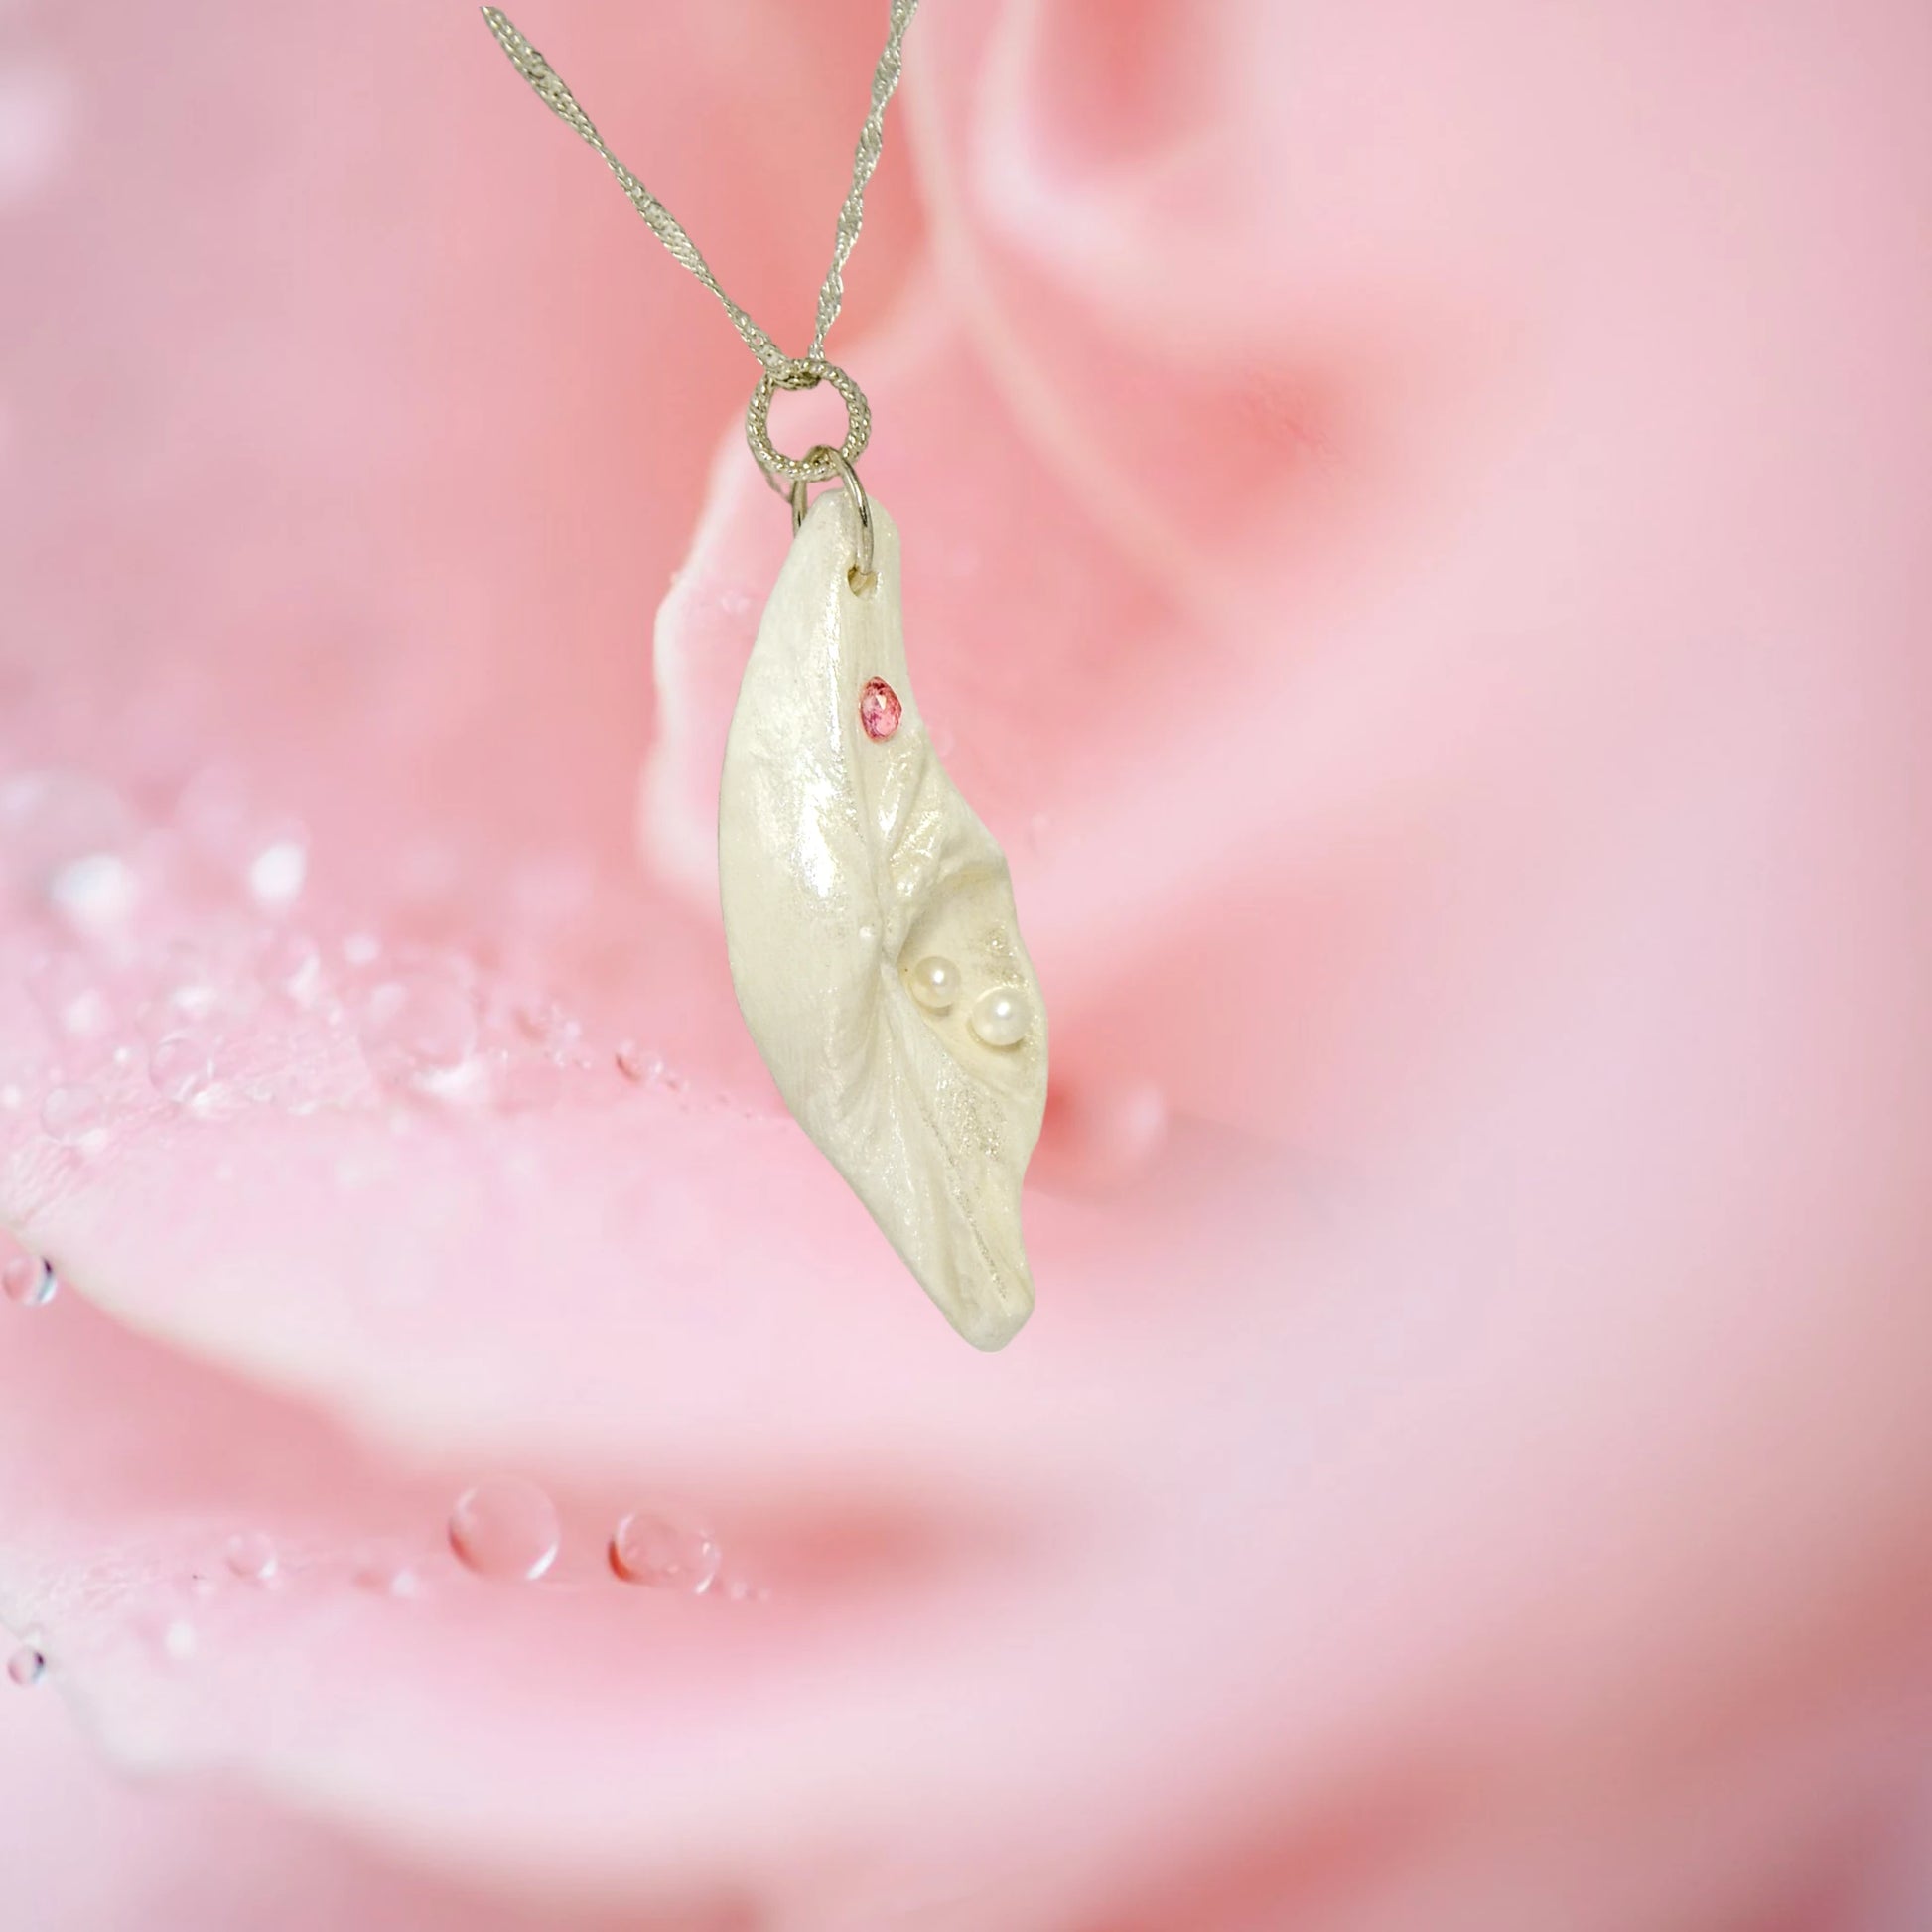 A trio of white baby freshwater pearls and a teardrop rose cut pink tourmaline gemstone compliments the seashell pendant beautifully. The pendant is turned so the viewer can see the right side of the pendant.